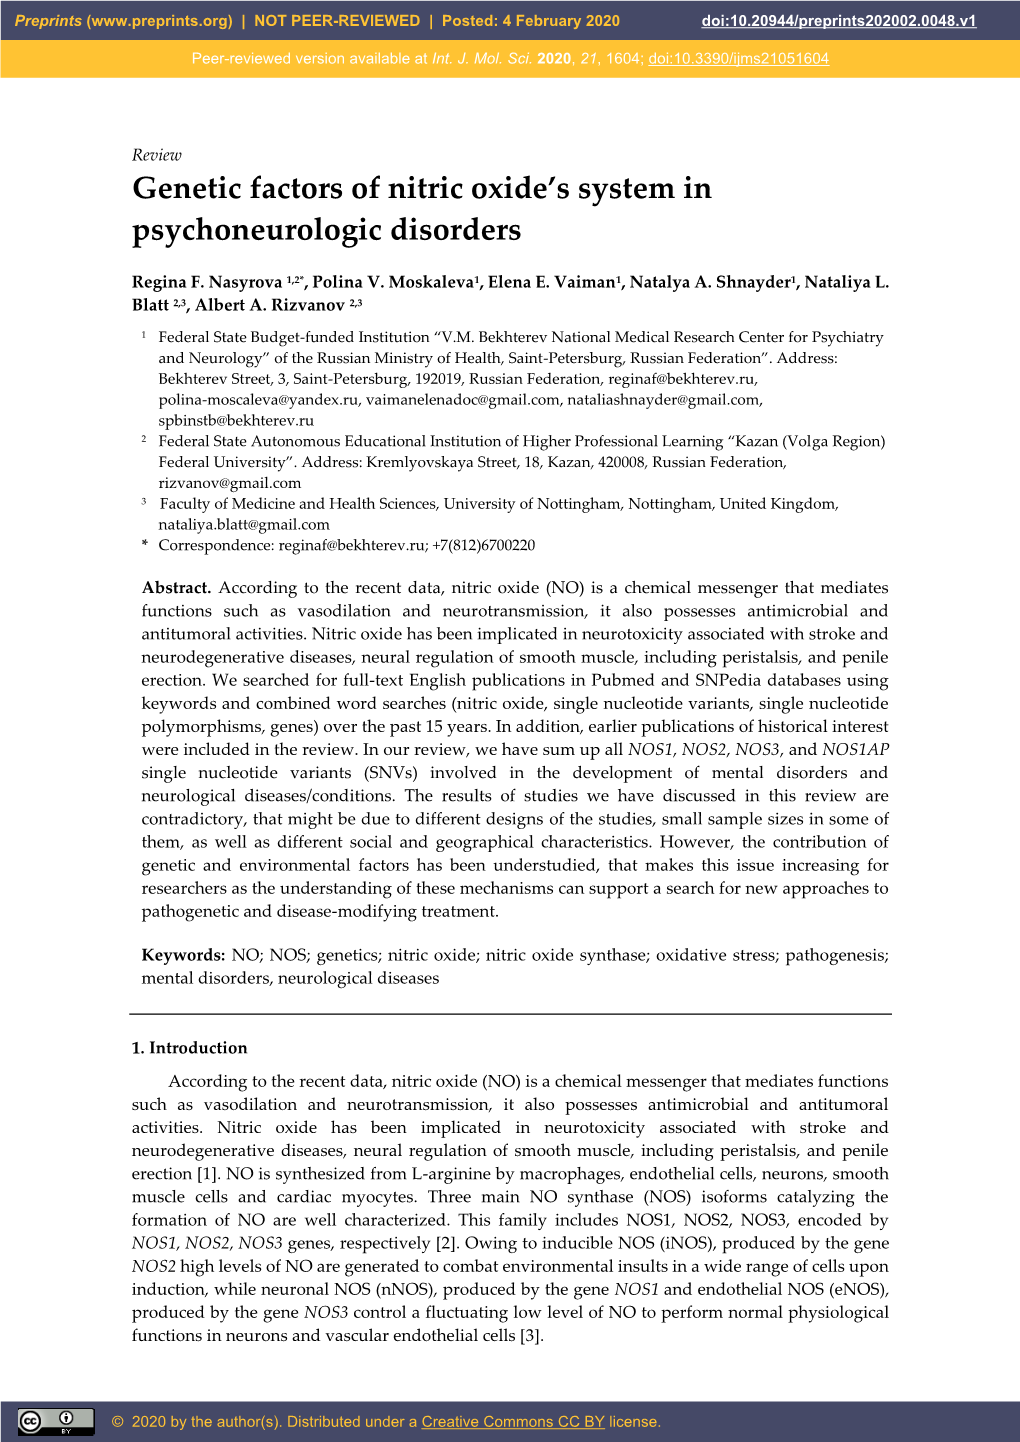 Genetic Factors of Nitric Oxide's System in Psychoneurologic Disorders